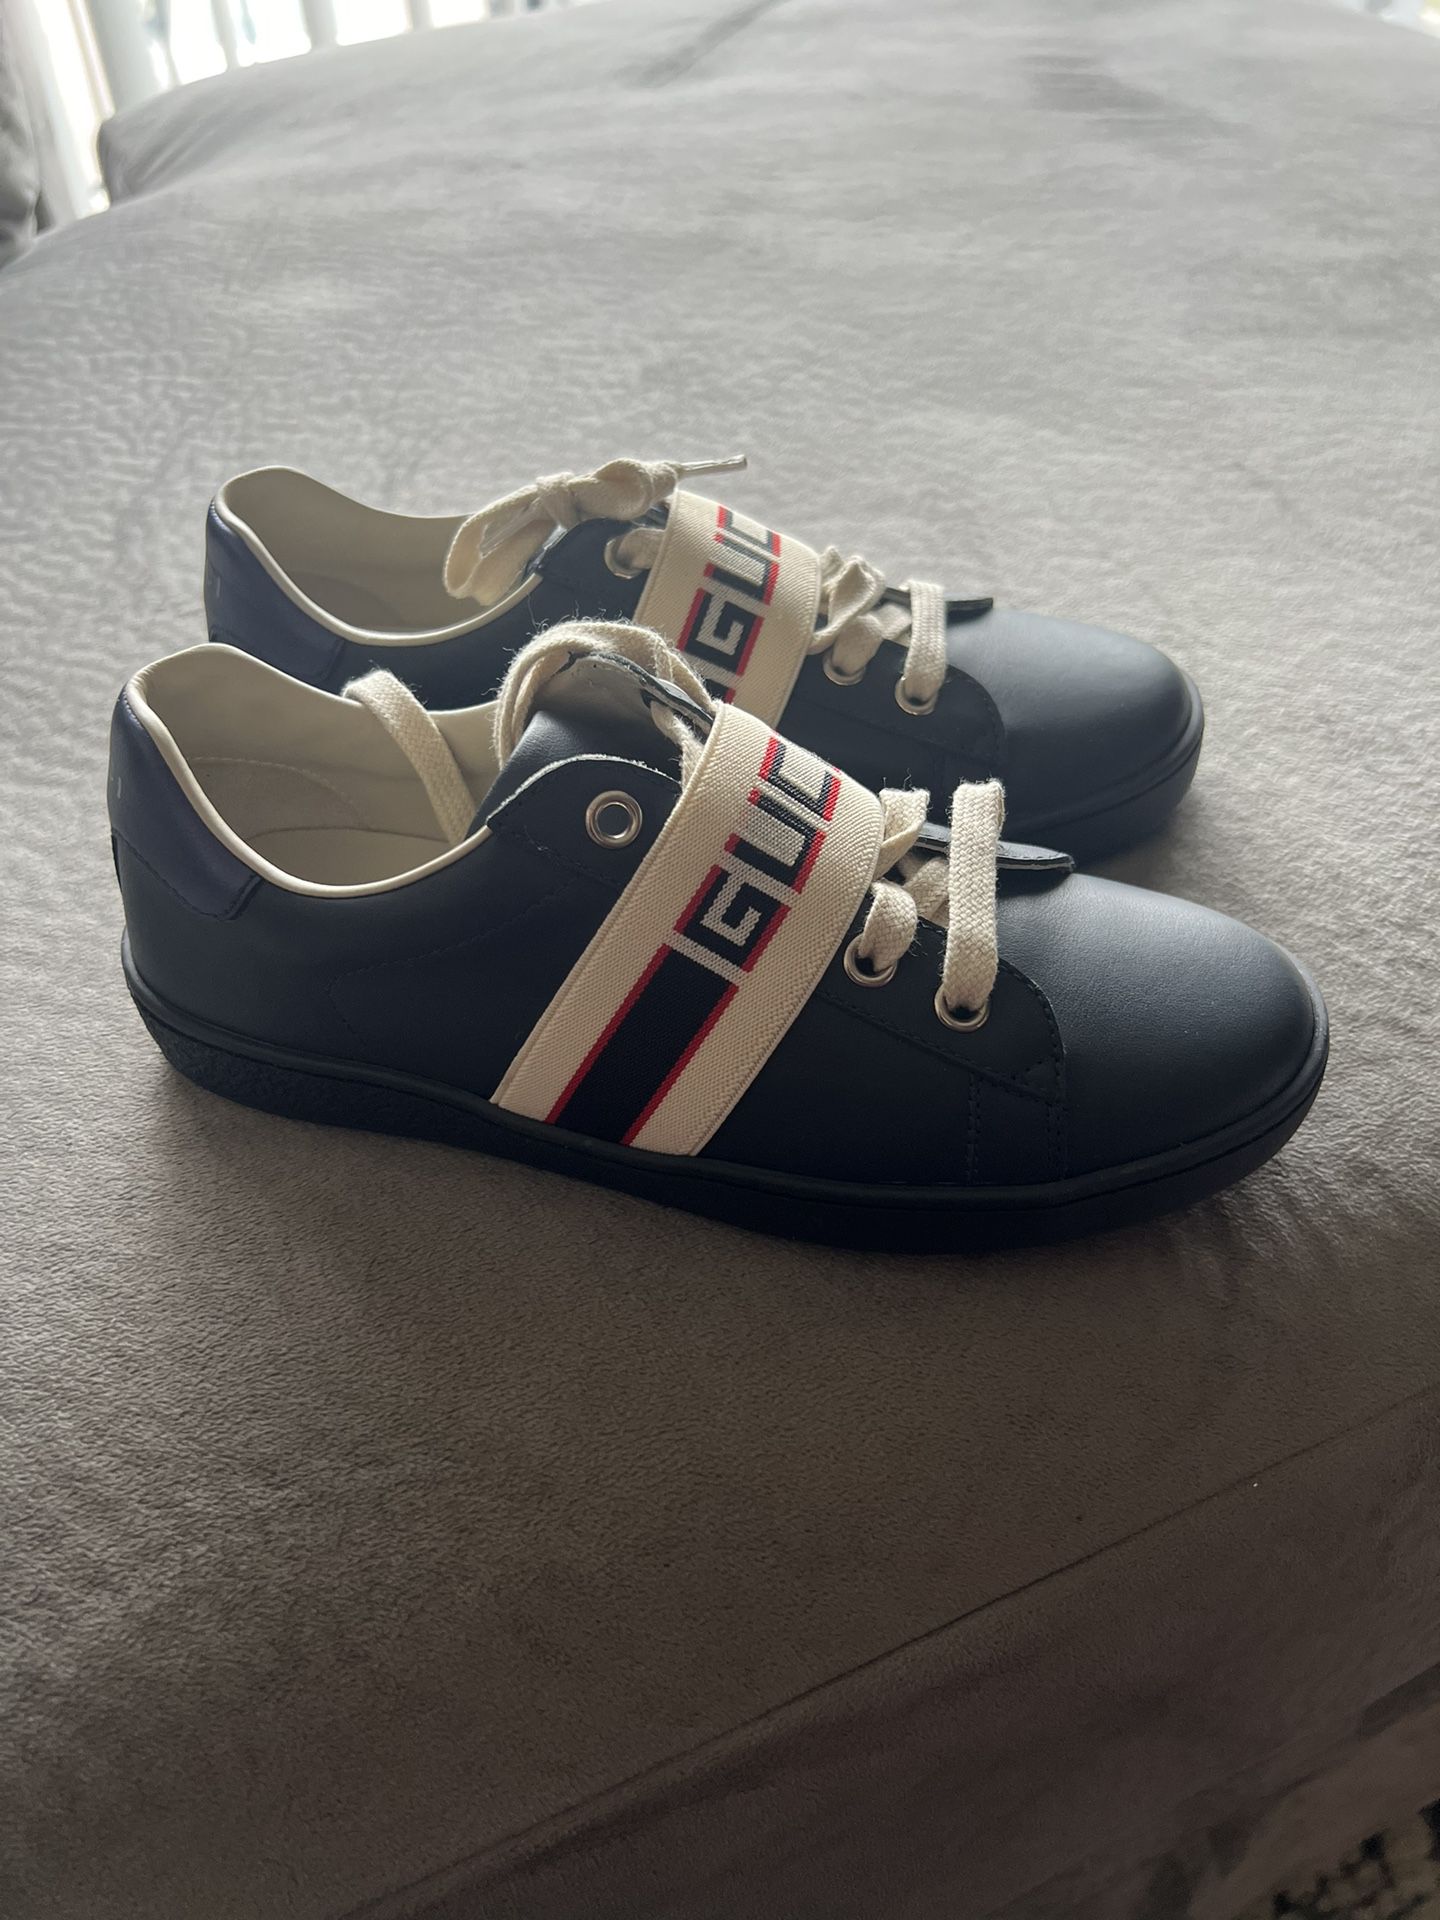 Gucci Shoes For Youth Size 1.5 